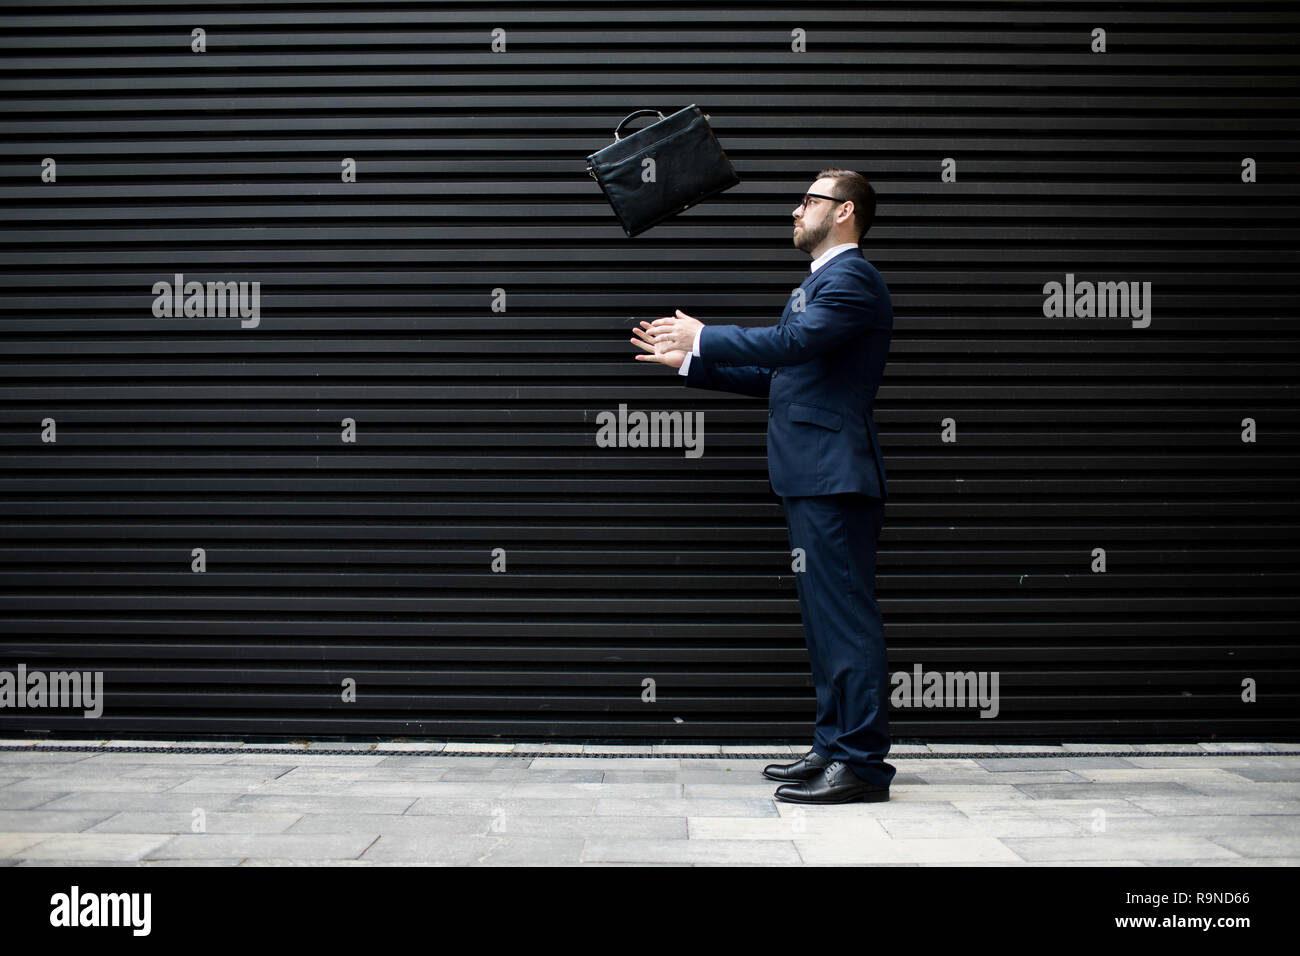 Businessman tossing briefcase Stock Photo